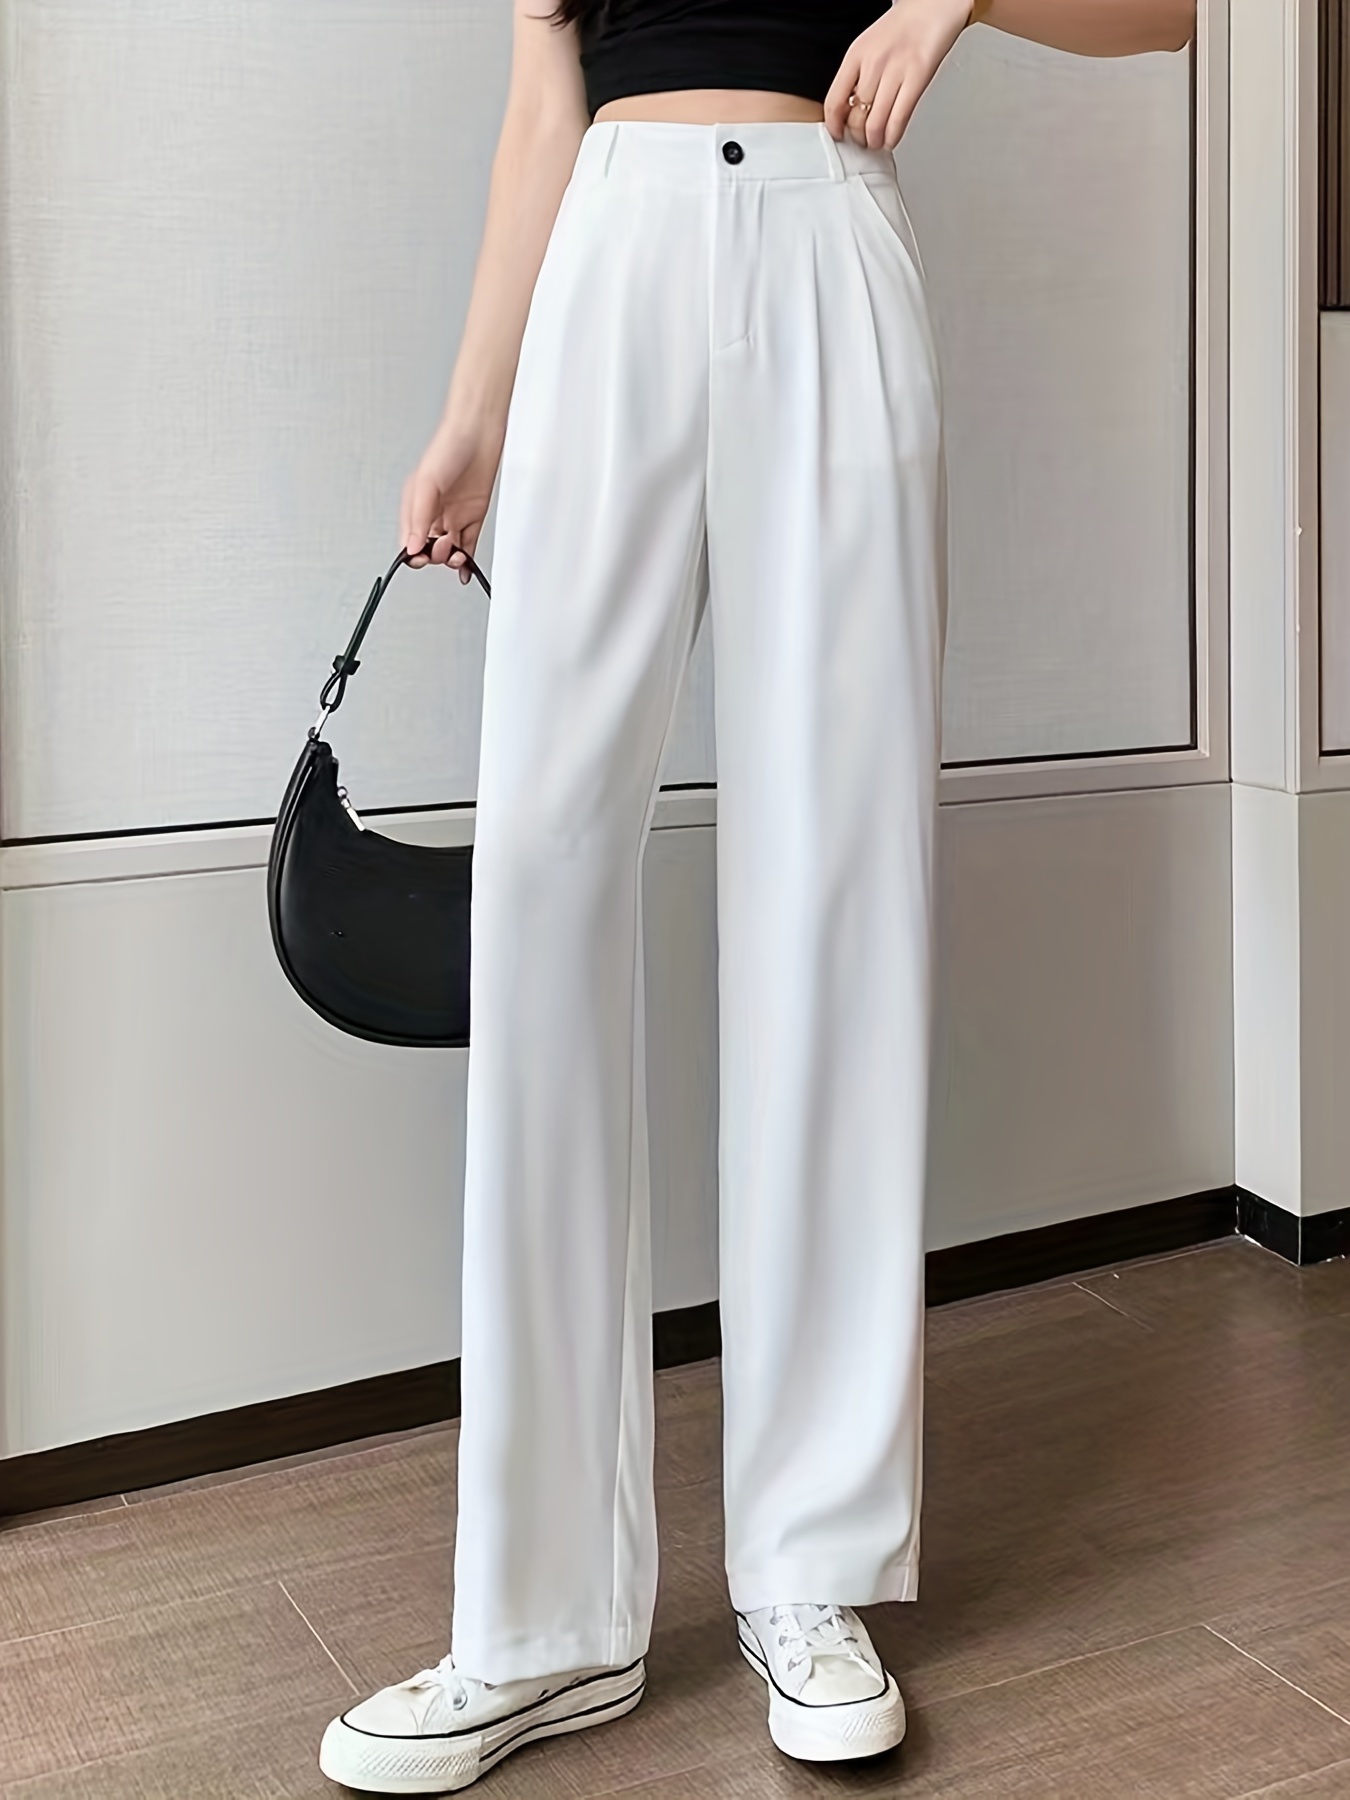 Autumn Casual Women Solid Color Skirt Long Trousers Fashion Ladies Loose  High Elastic Waist Wide Leg Long Pants for Spring